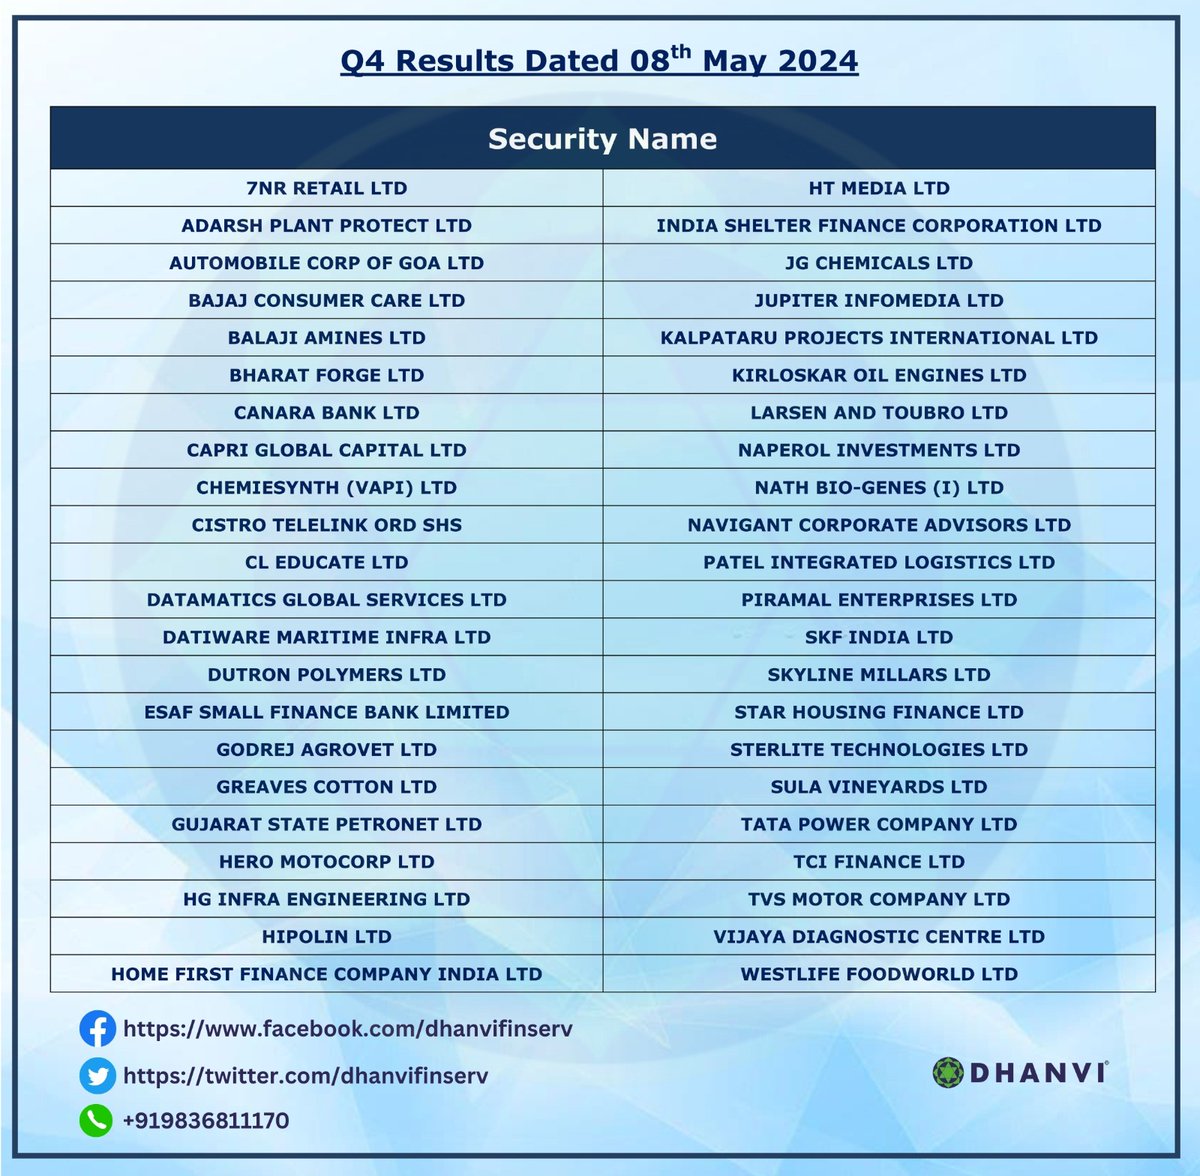 Q4 Results Dated 08th May 2024 👇

#Q4Results #dhanvifinserv #investment #sharemarketindia #sharemarketnews #market #stockmarketindia #bse #nse #niftyfifty #investment #intraday #investor #Resultstoday #Q4 #investors #stock #Q4Earnings #q4marketreport #investments #StockToWatch